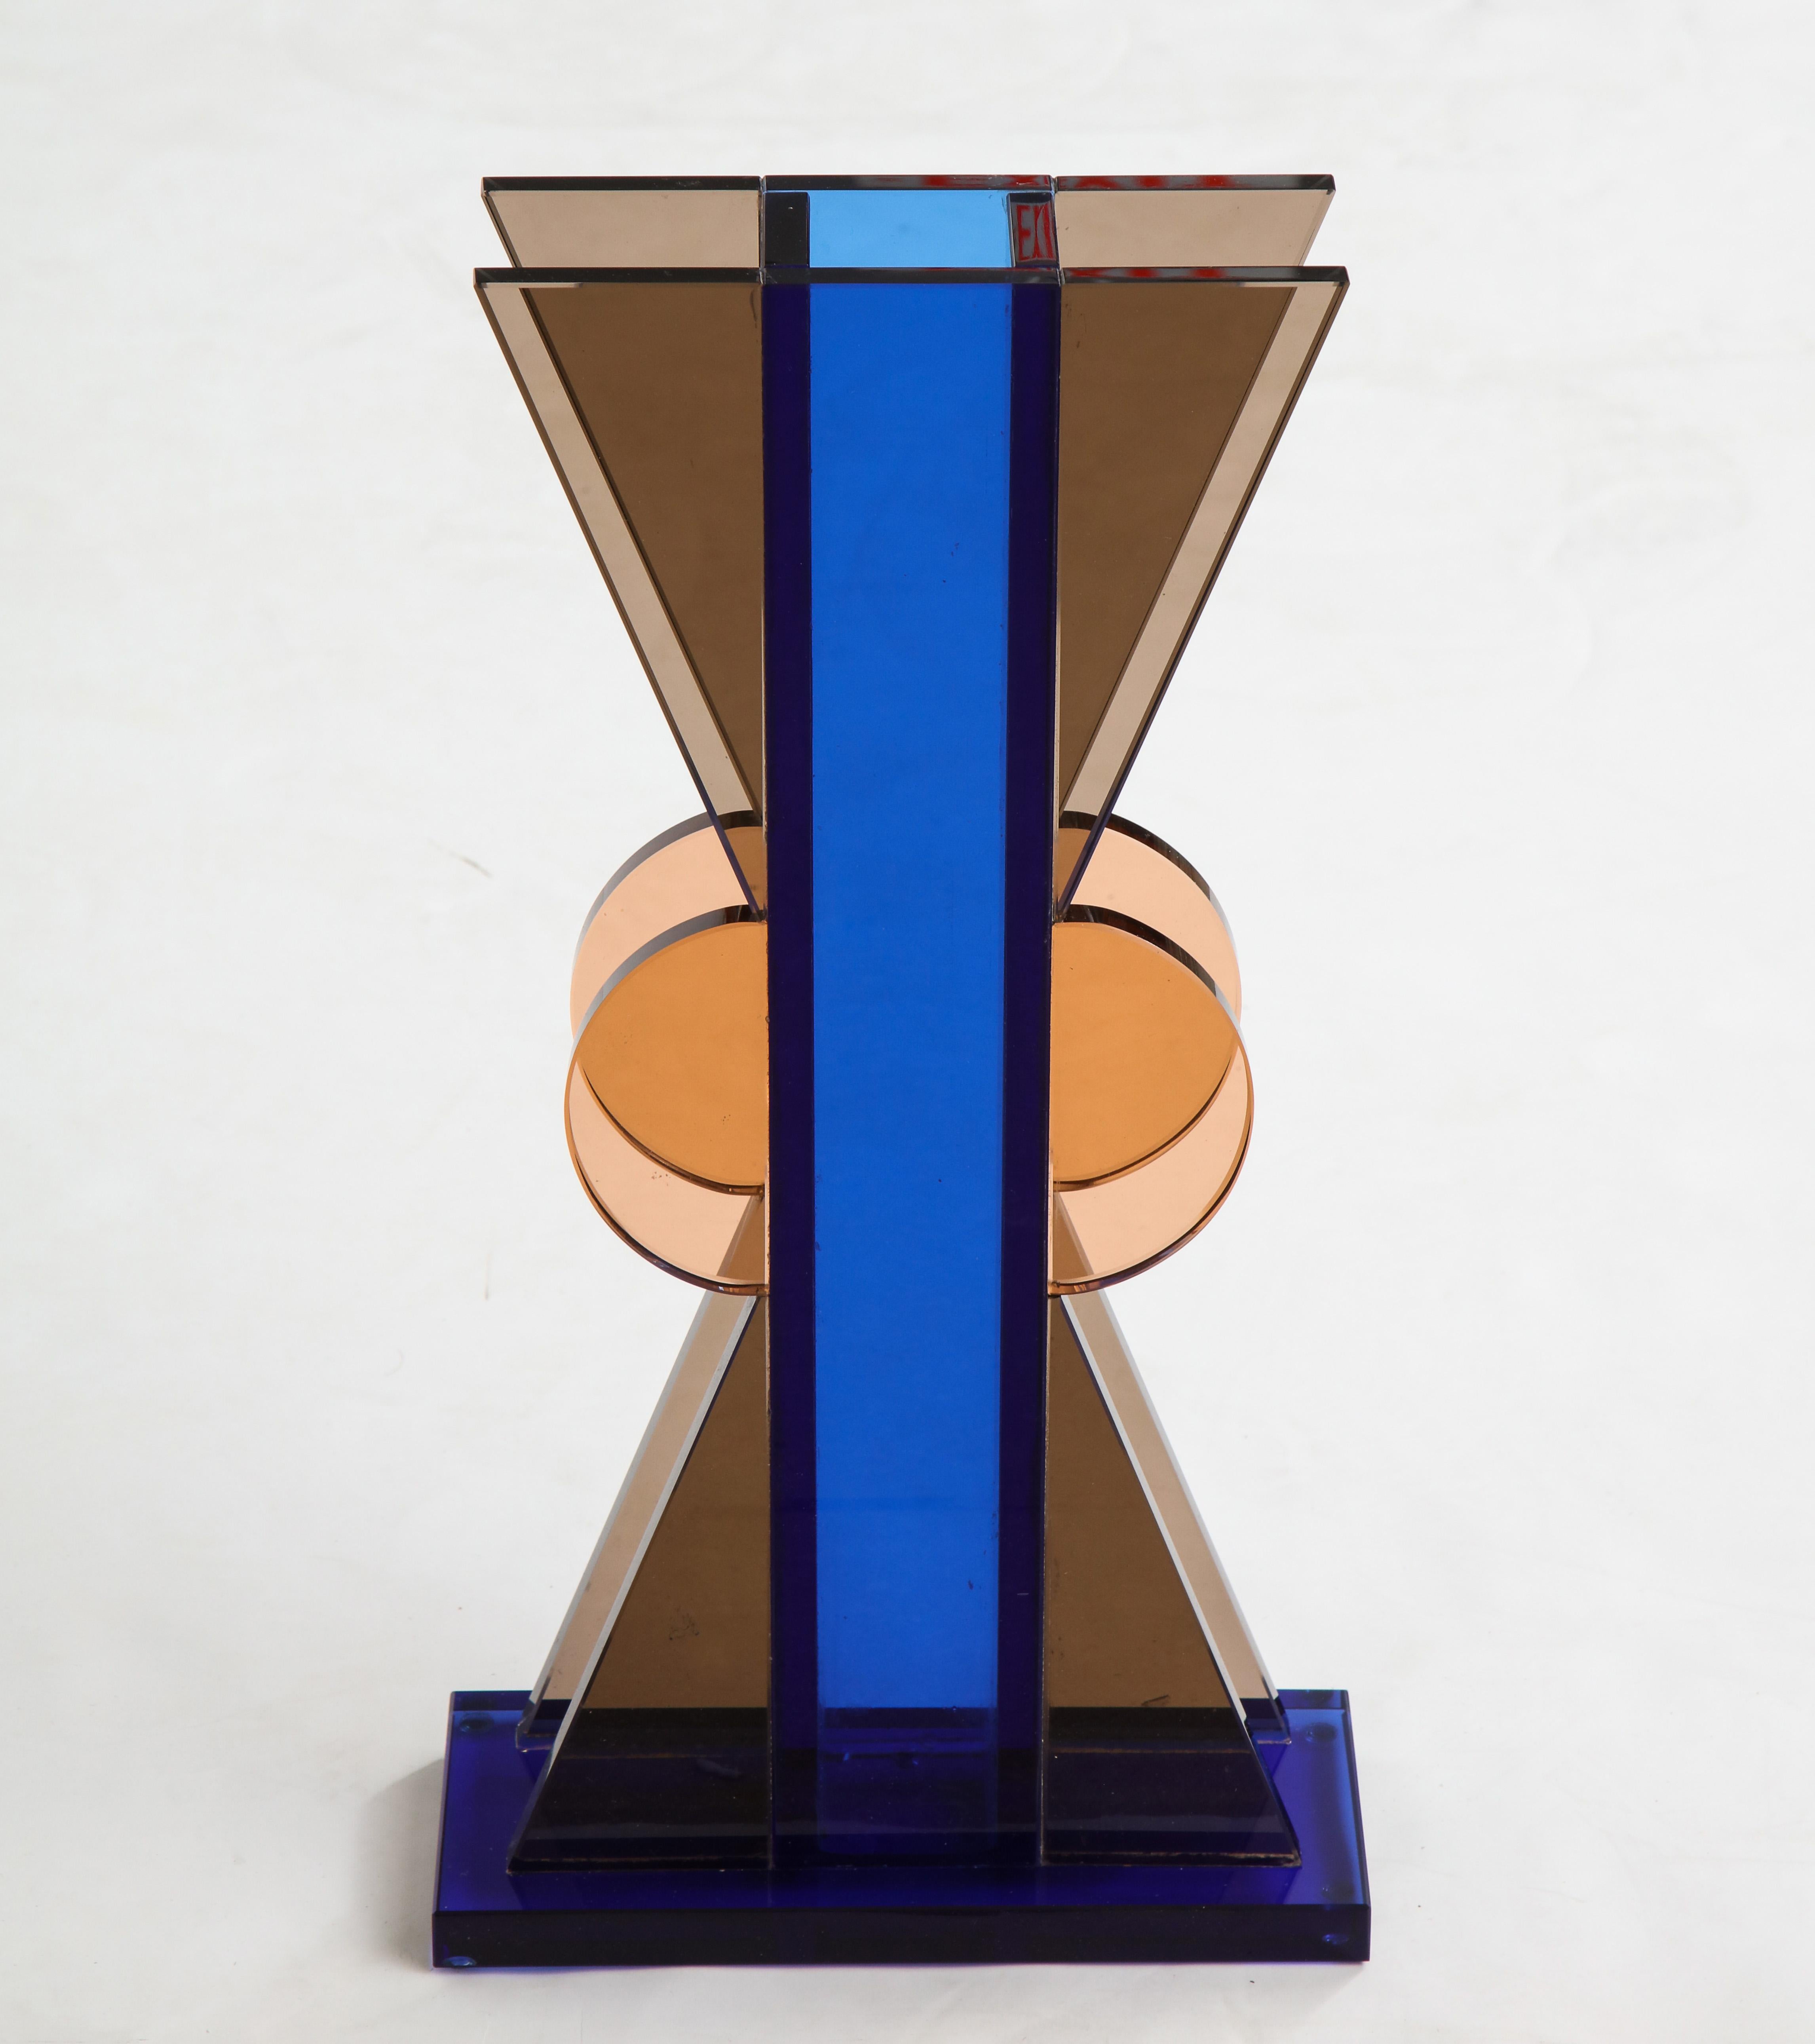 Ettore Sottsass for Fontana Arte rare large graphic colored crystal vase consisting of dark blue central square cylinder with attached brown triangular and caramel semi-circular shapes on rectangular dark blue base.

Literature:
Marco Romanelli, Il